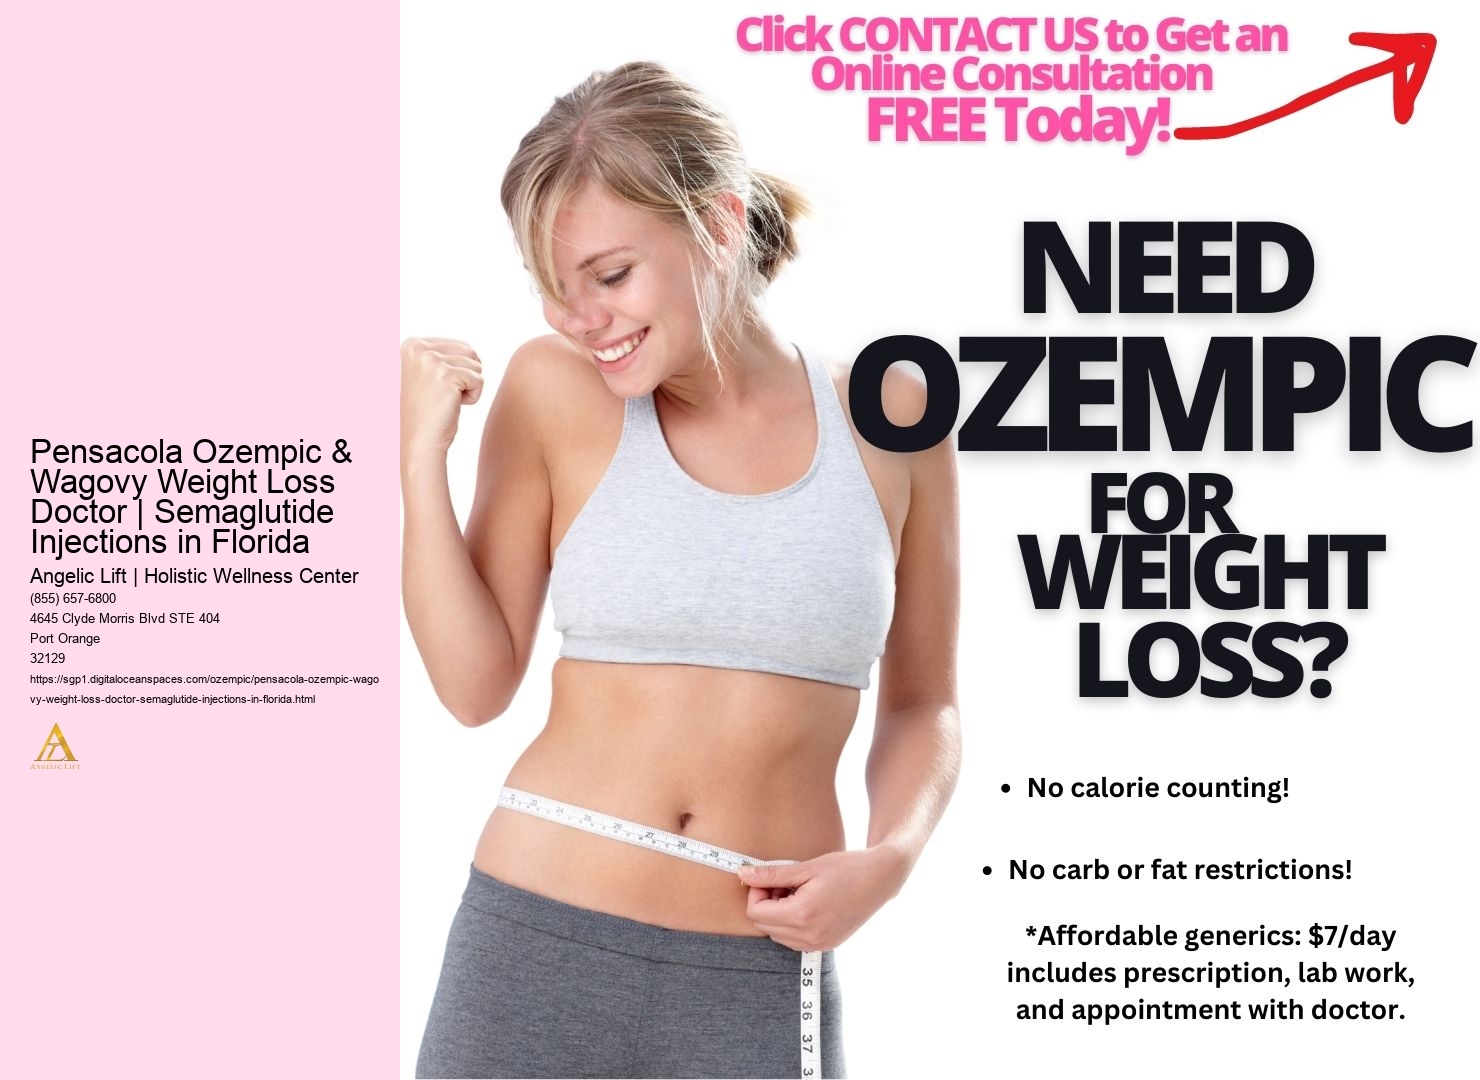 Pensacola Ozempic & Wagovy Weight Loss Doctor | Semaglutide Injections in Florida